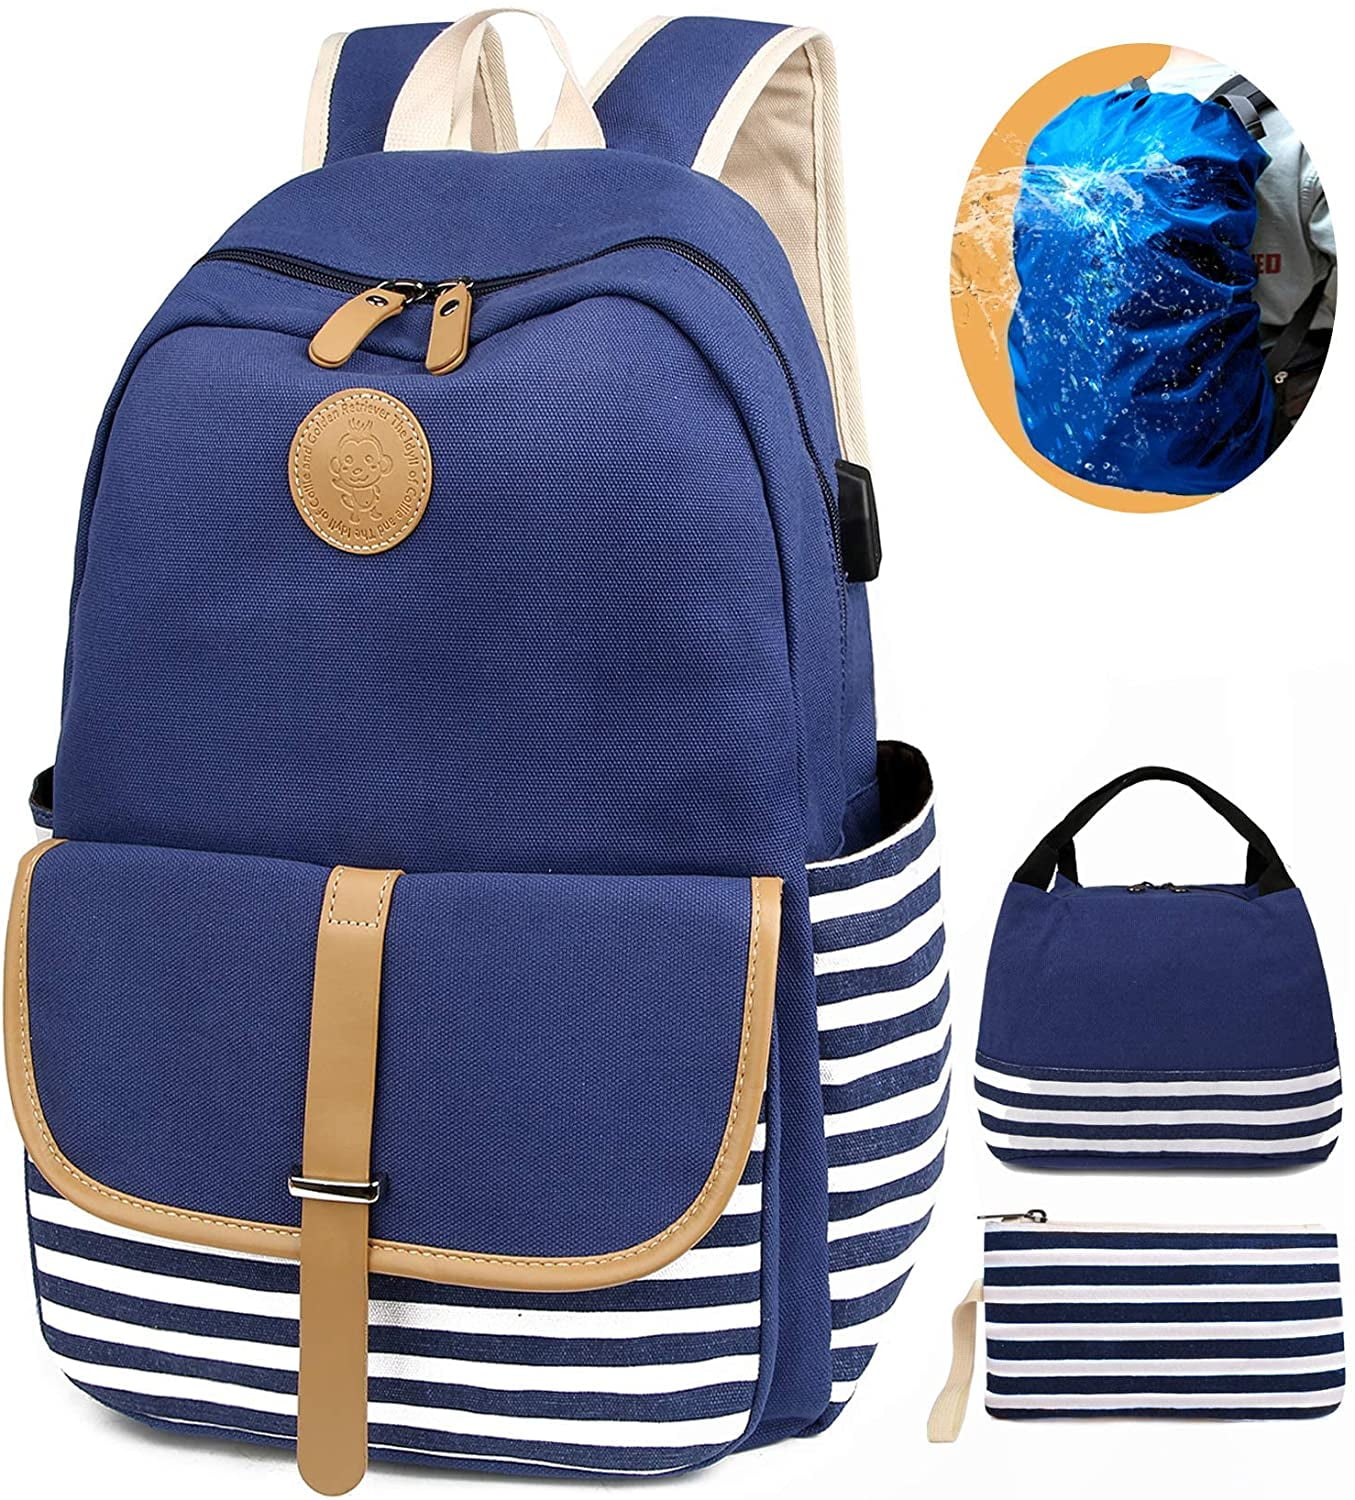 Fasterzone STYLISH CLASSIC SCHOOL COLLEGE TUTION BAG FOR BOYS AND GIRLS 35  L Laptop Backpack BLUE - Price in India | Flipkart.com